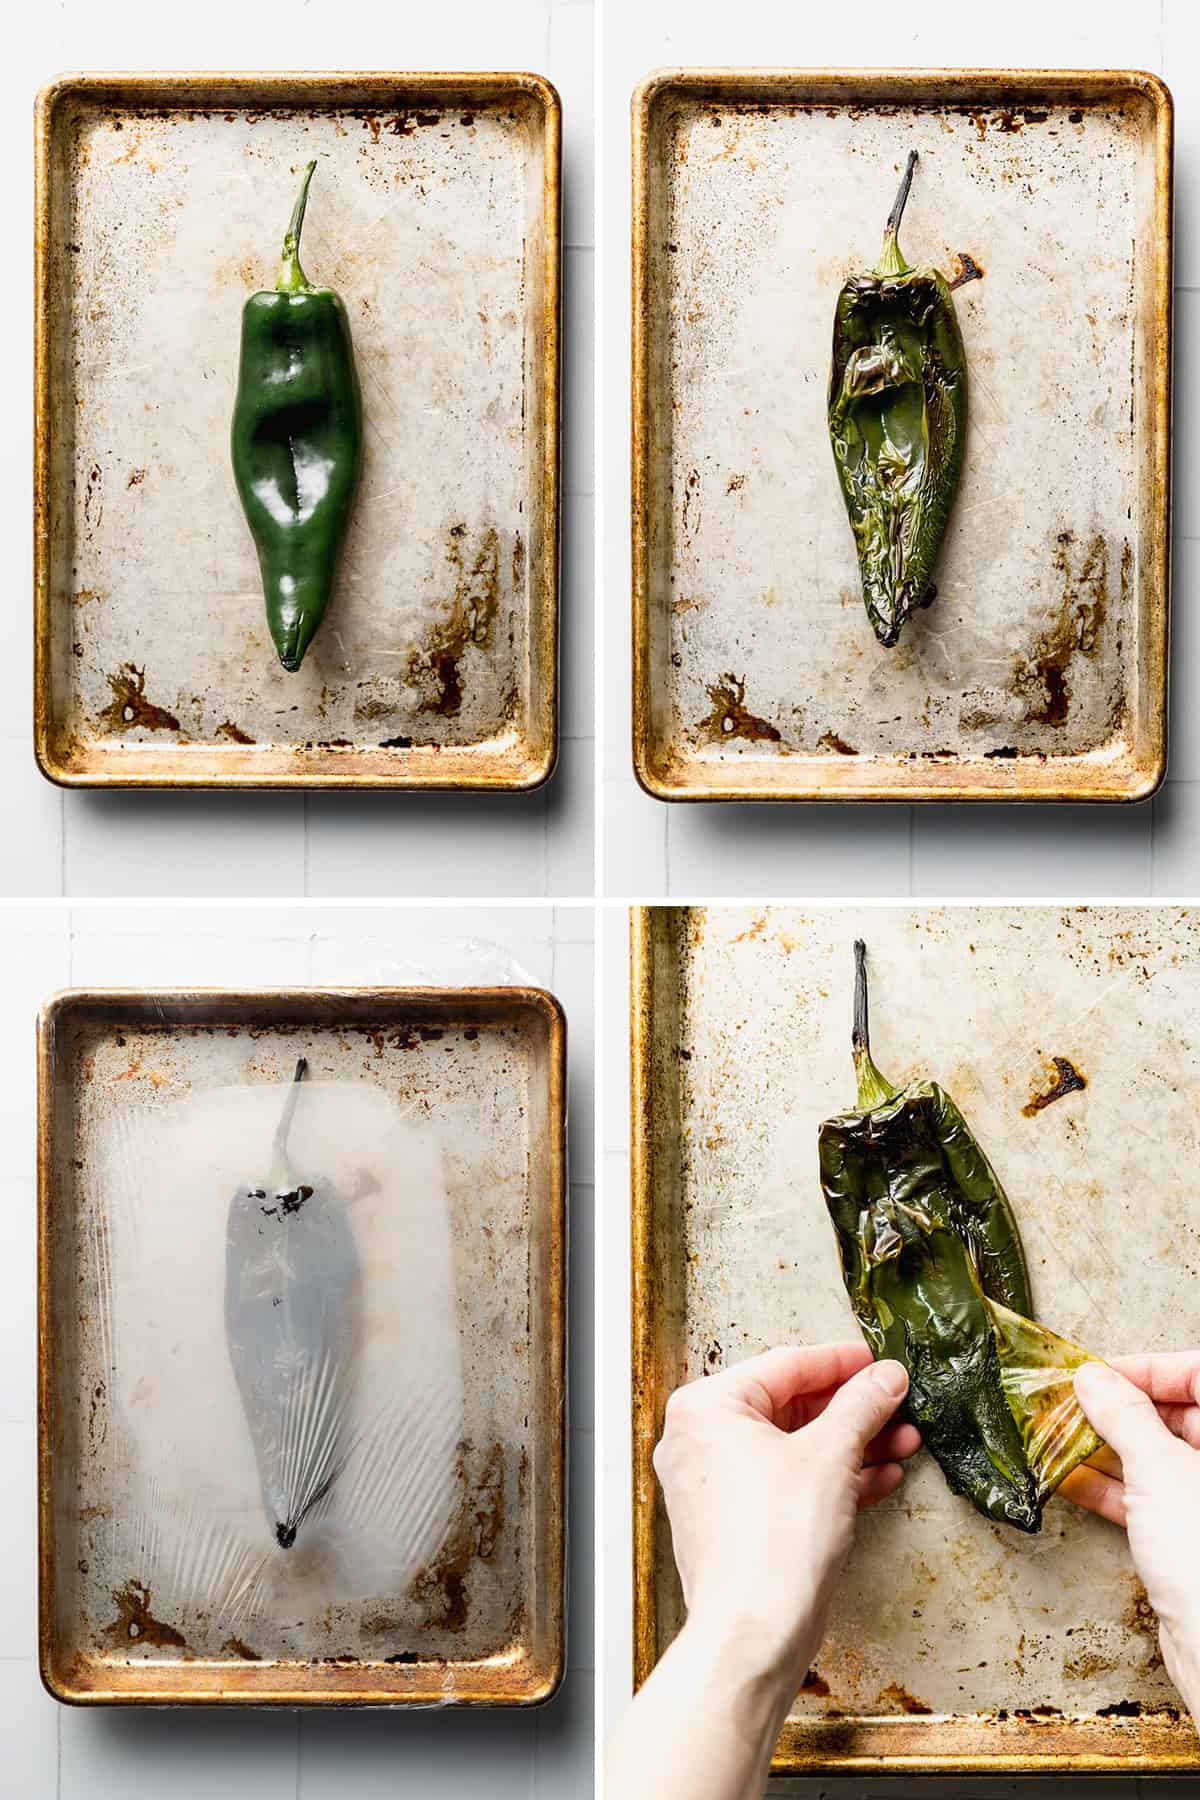 Poblano pepper on sheet pan is charred and roasted, skin pulled from the pepper.